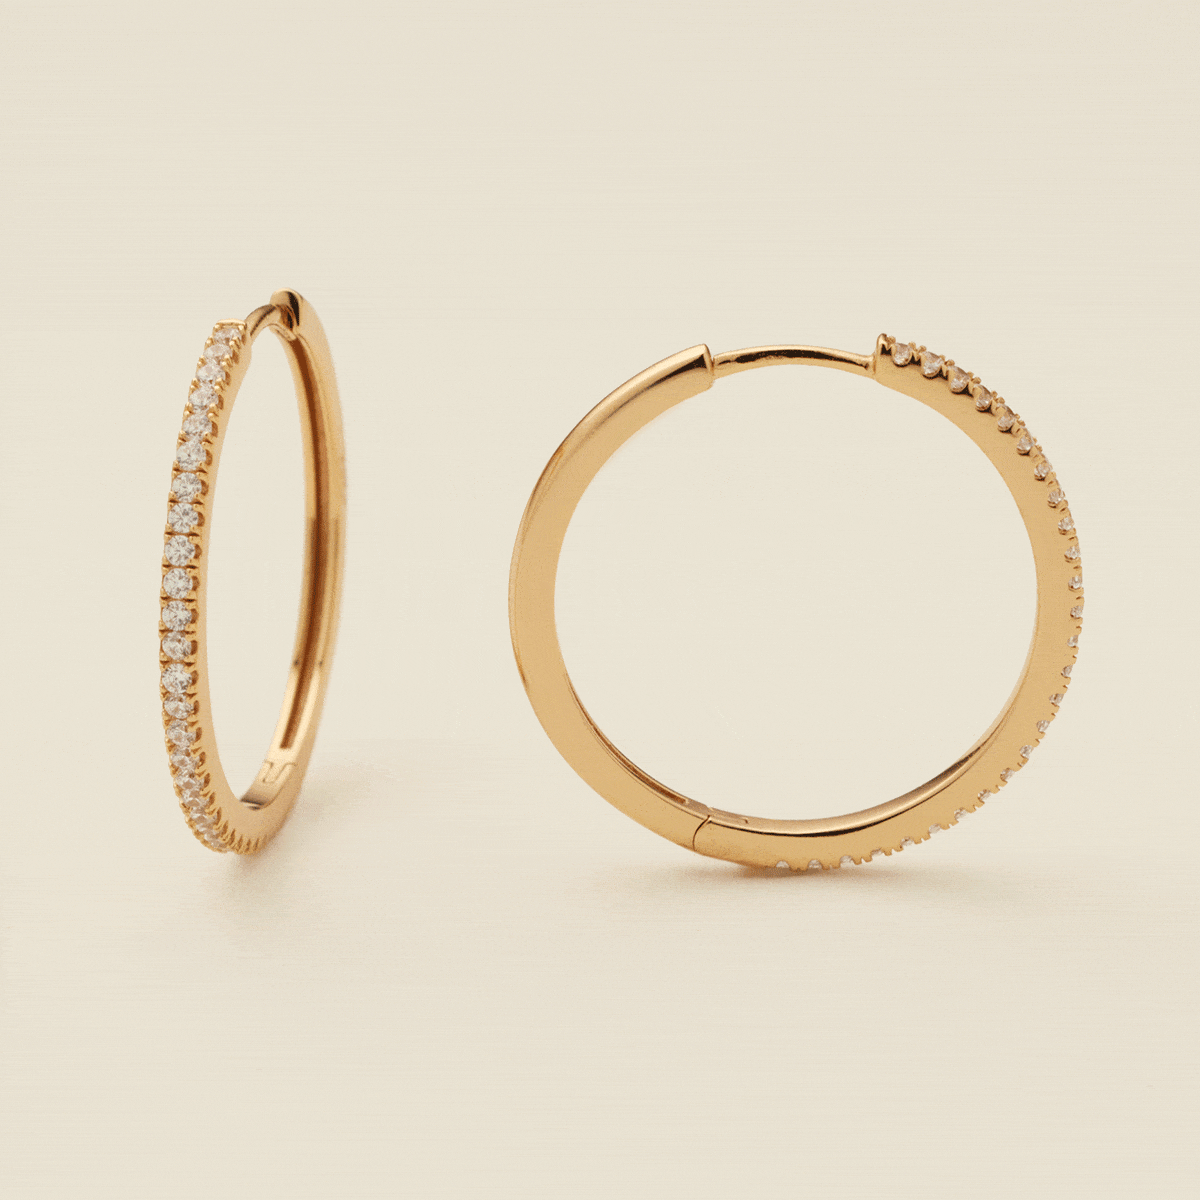 25mm Luxe Hoop & Stacking Band Set Jewelry Set